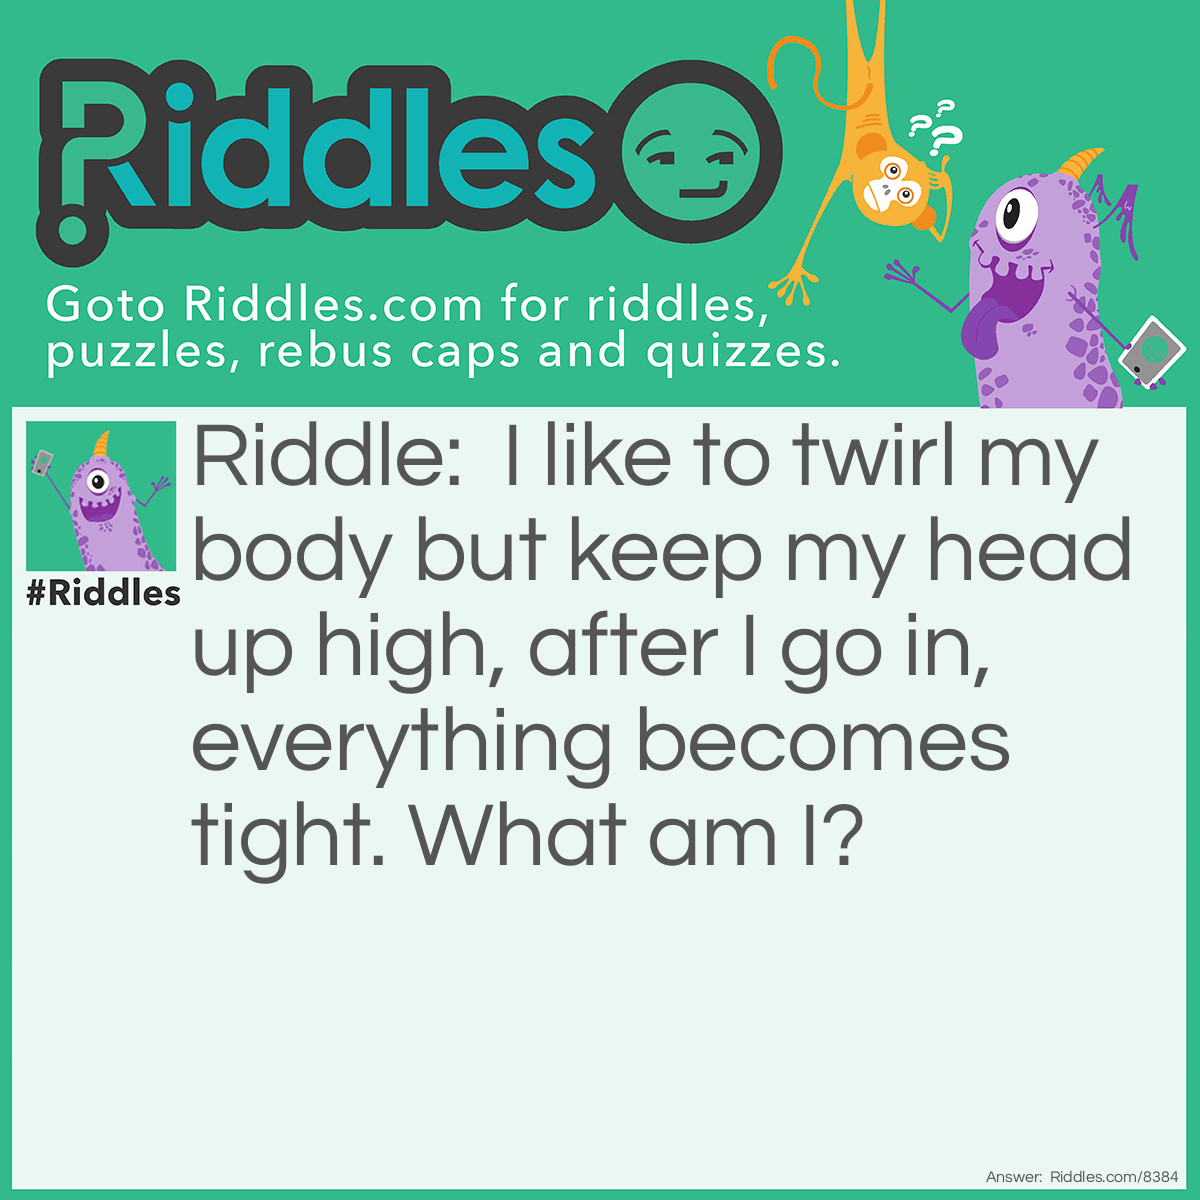 Riddle: I like to twirl my body but keep my head up high, after I go in, everything becomes tight. What am I? Answer: A screw.